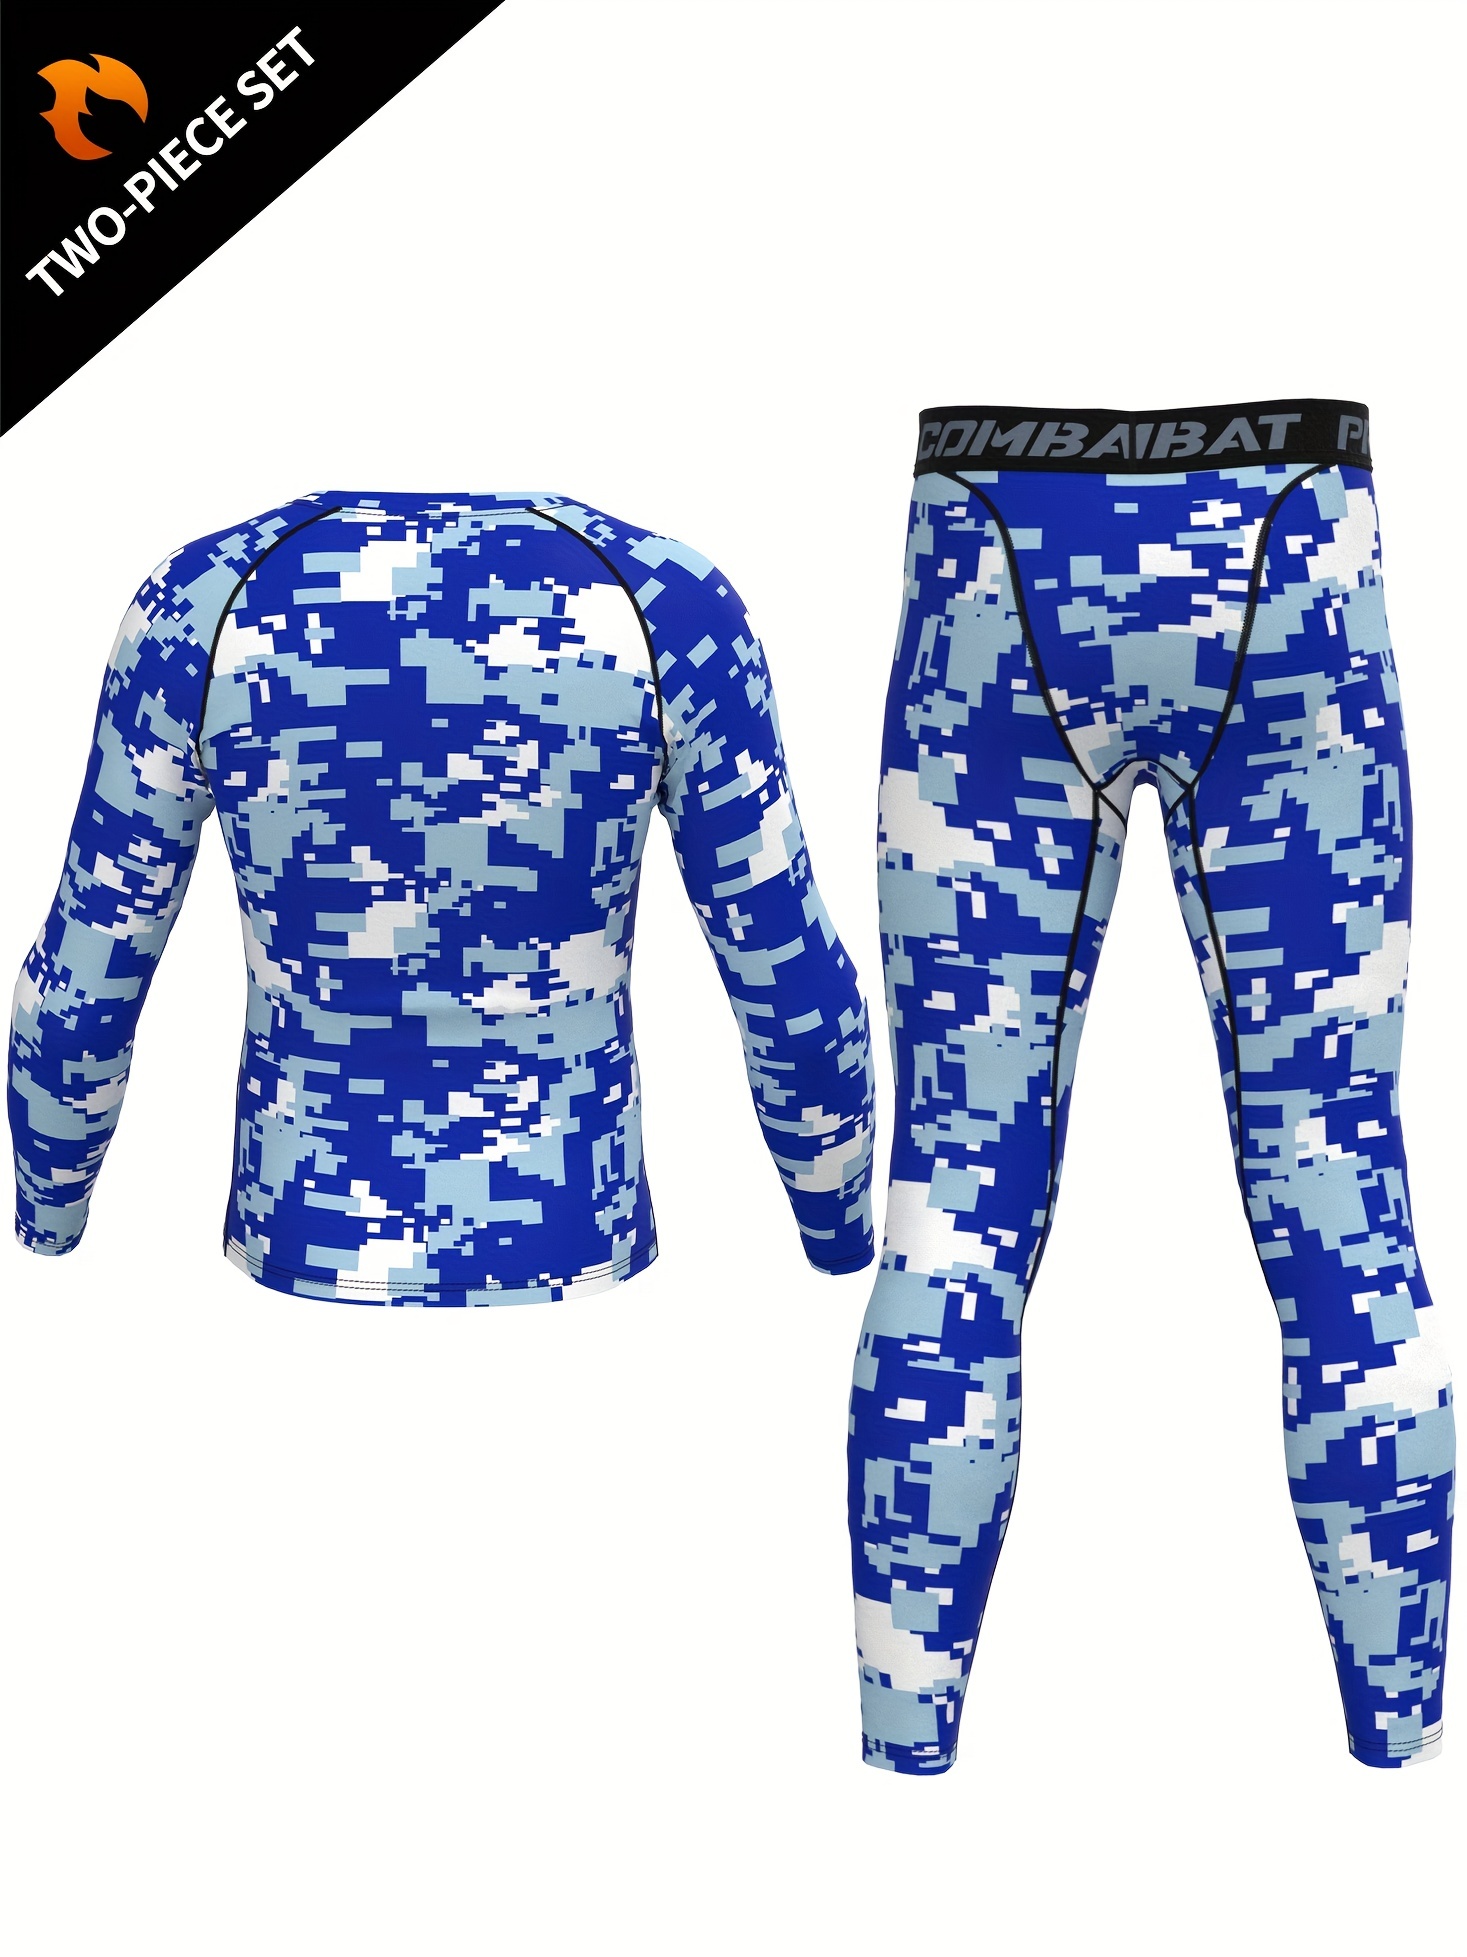 MEN'S NEW TEK Gear Base Layer Compression Pants Camo New With Tags $14.99 -  PicClick